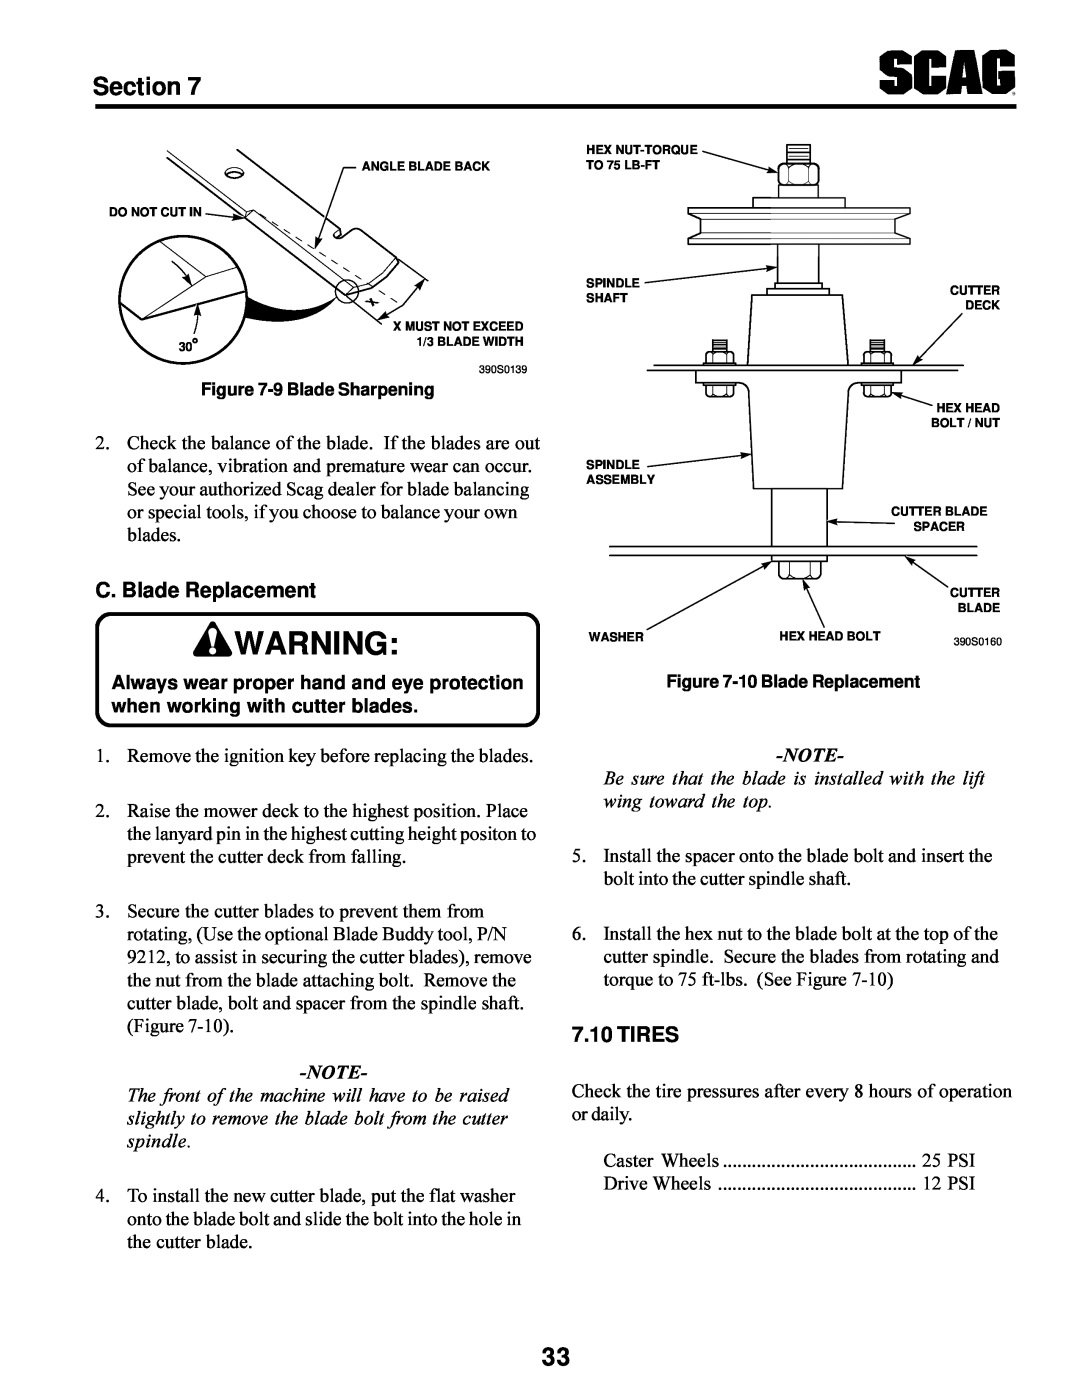 Scag Power Equipment STT-31BSG manual C. Blade Replacement, Tires, Section 